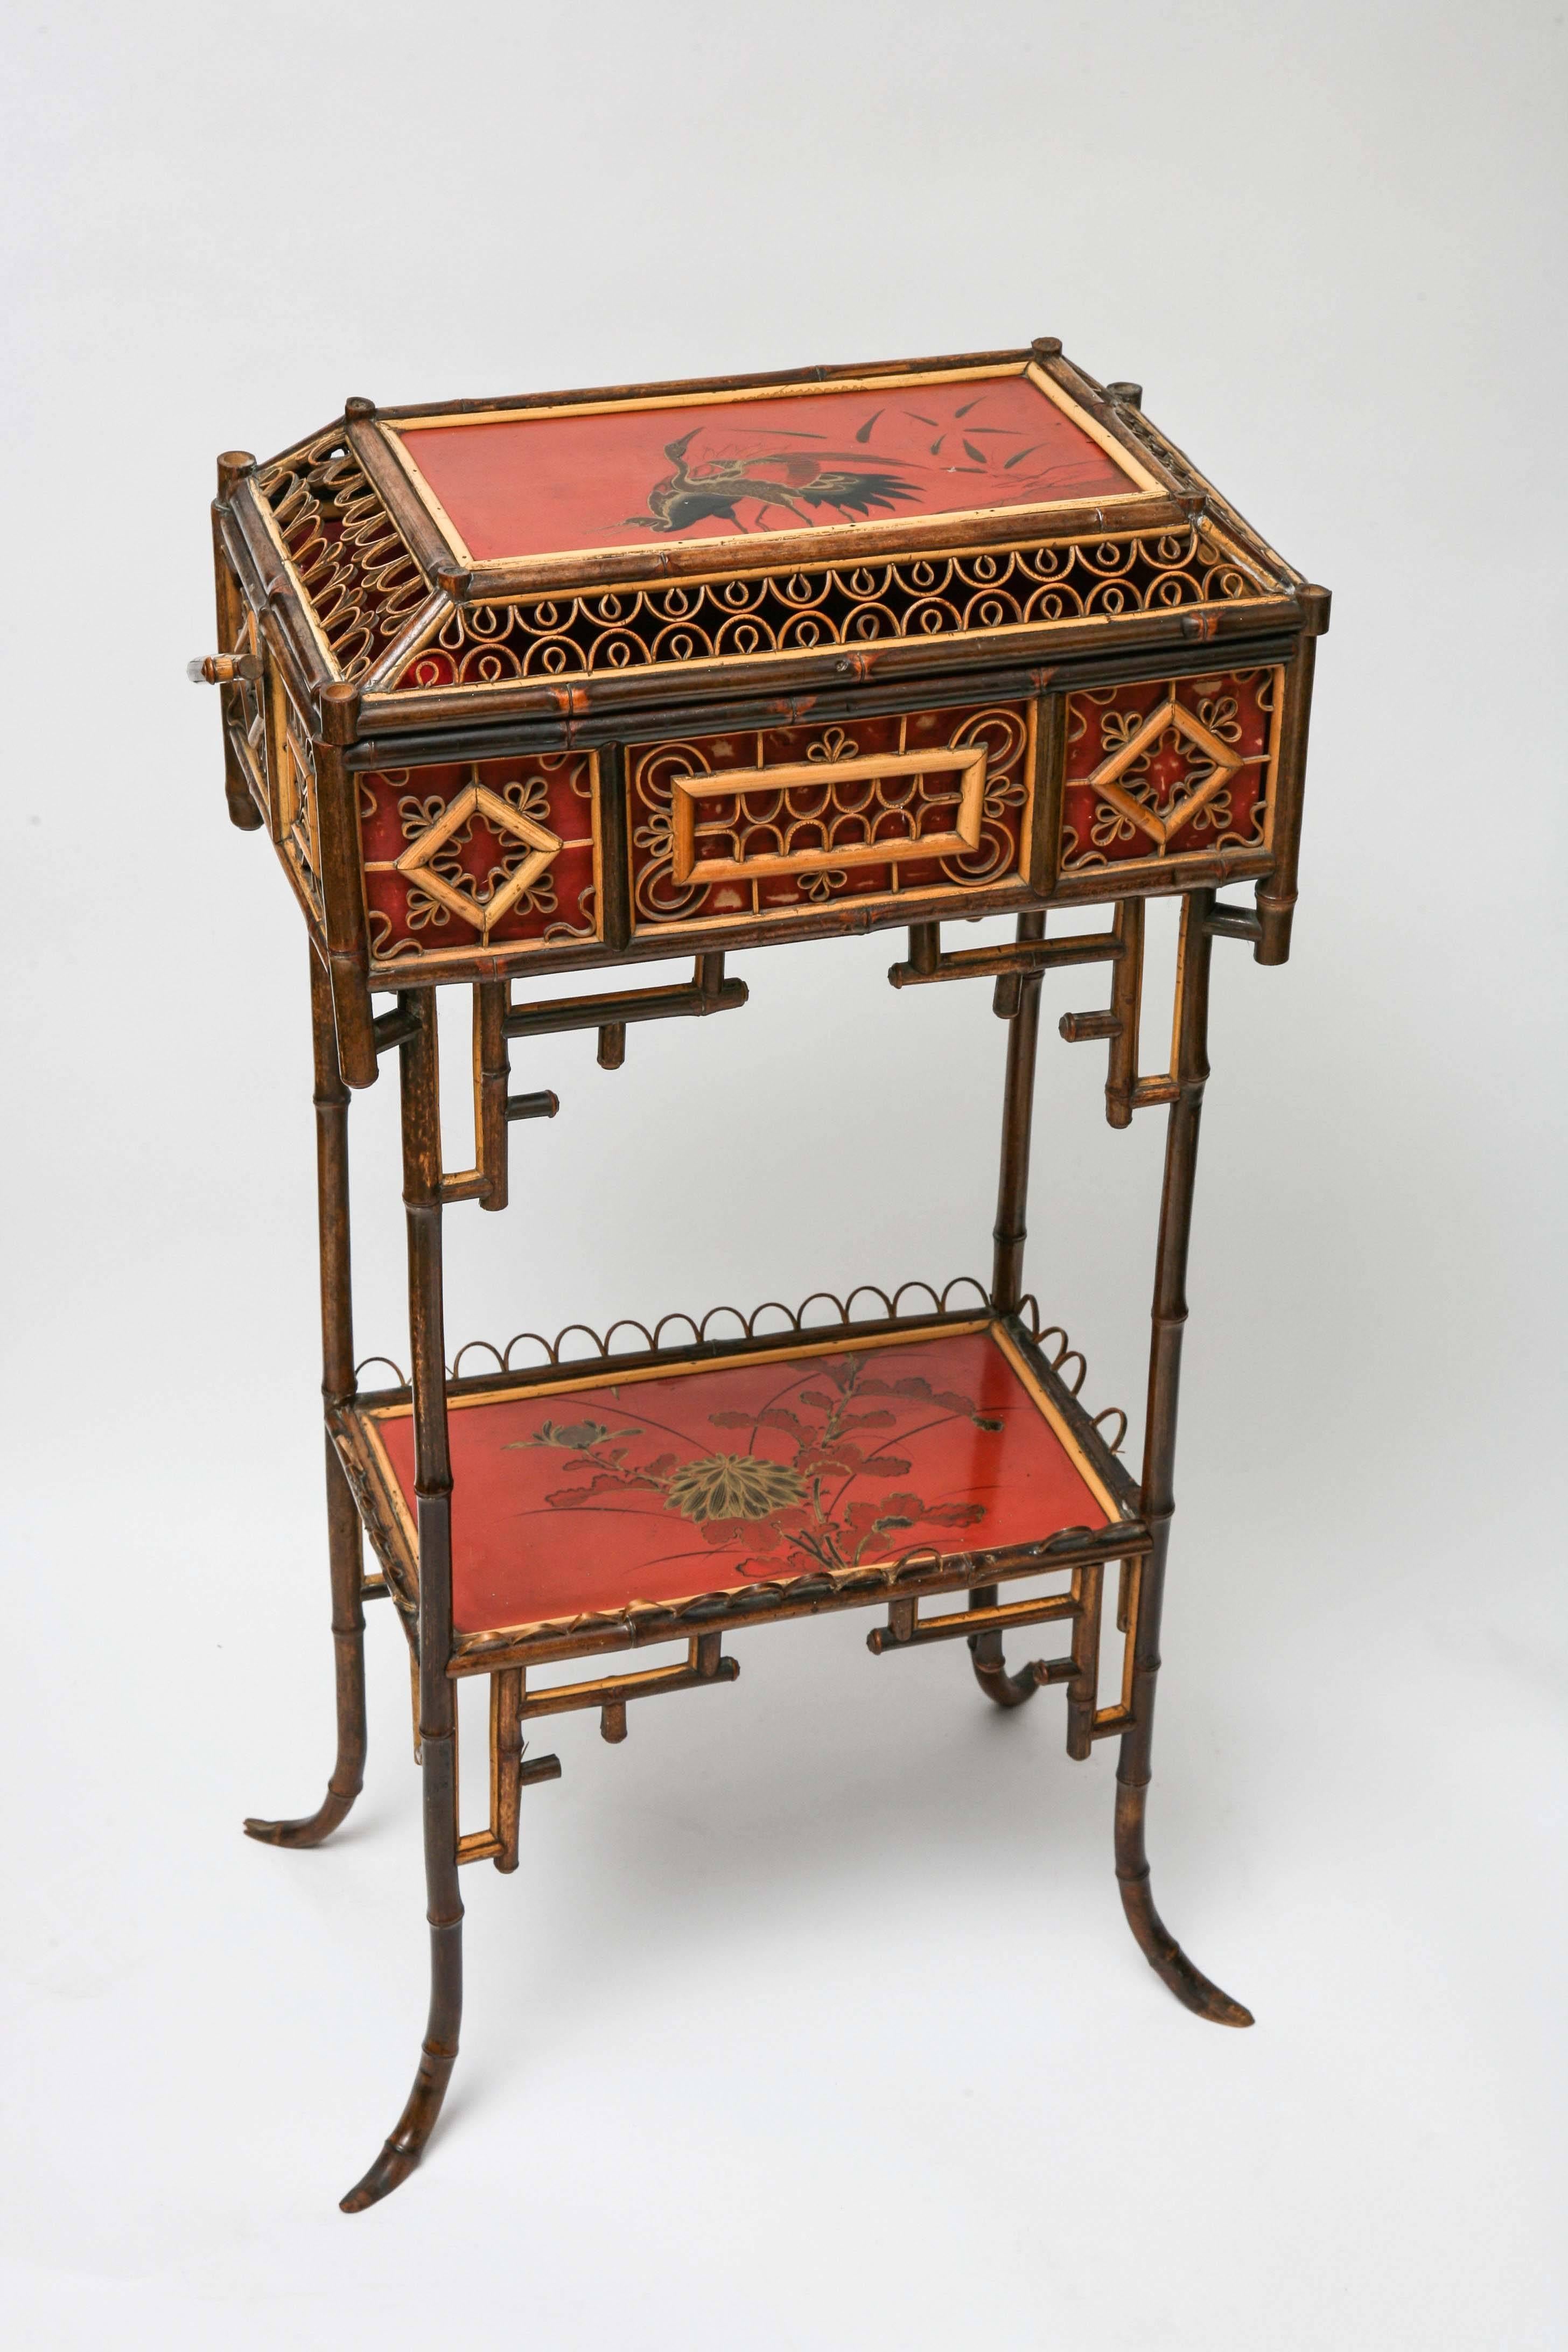 Fine 19th century English bamboo sewing stand with two fine lacquered panels and very dedicated detail to form. Unusual piece and all original.